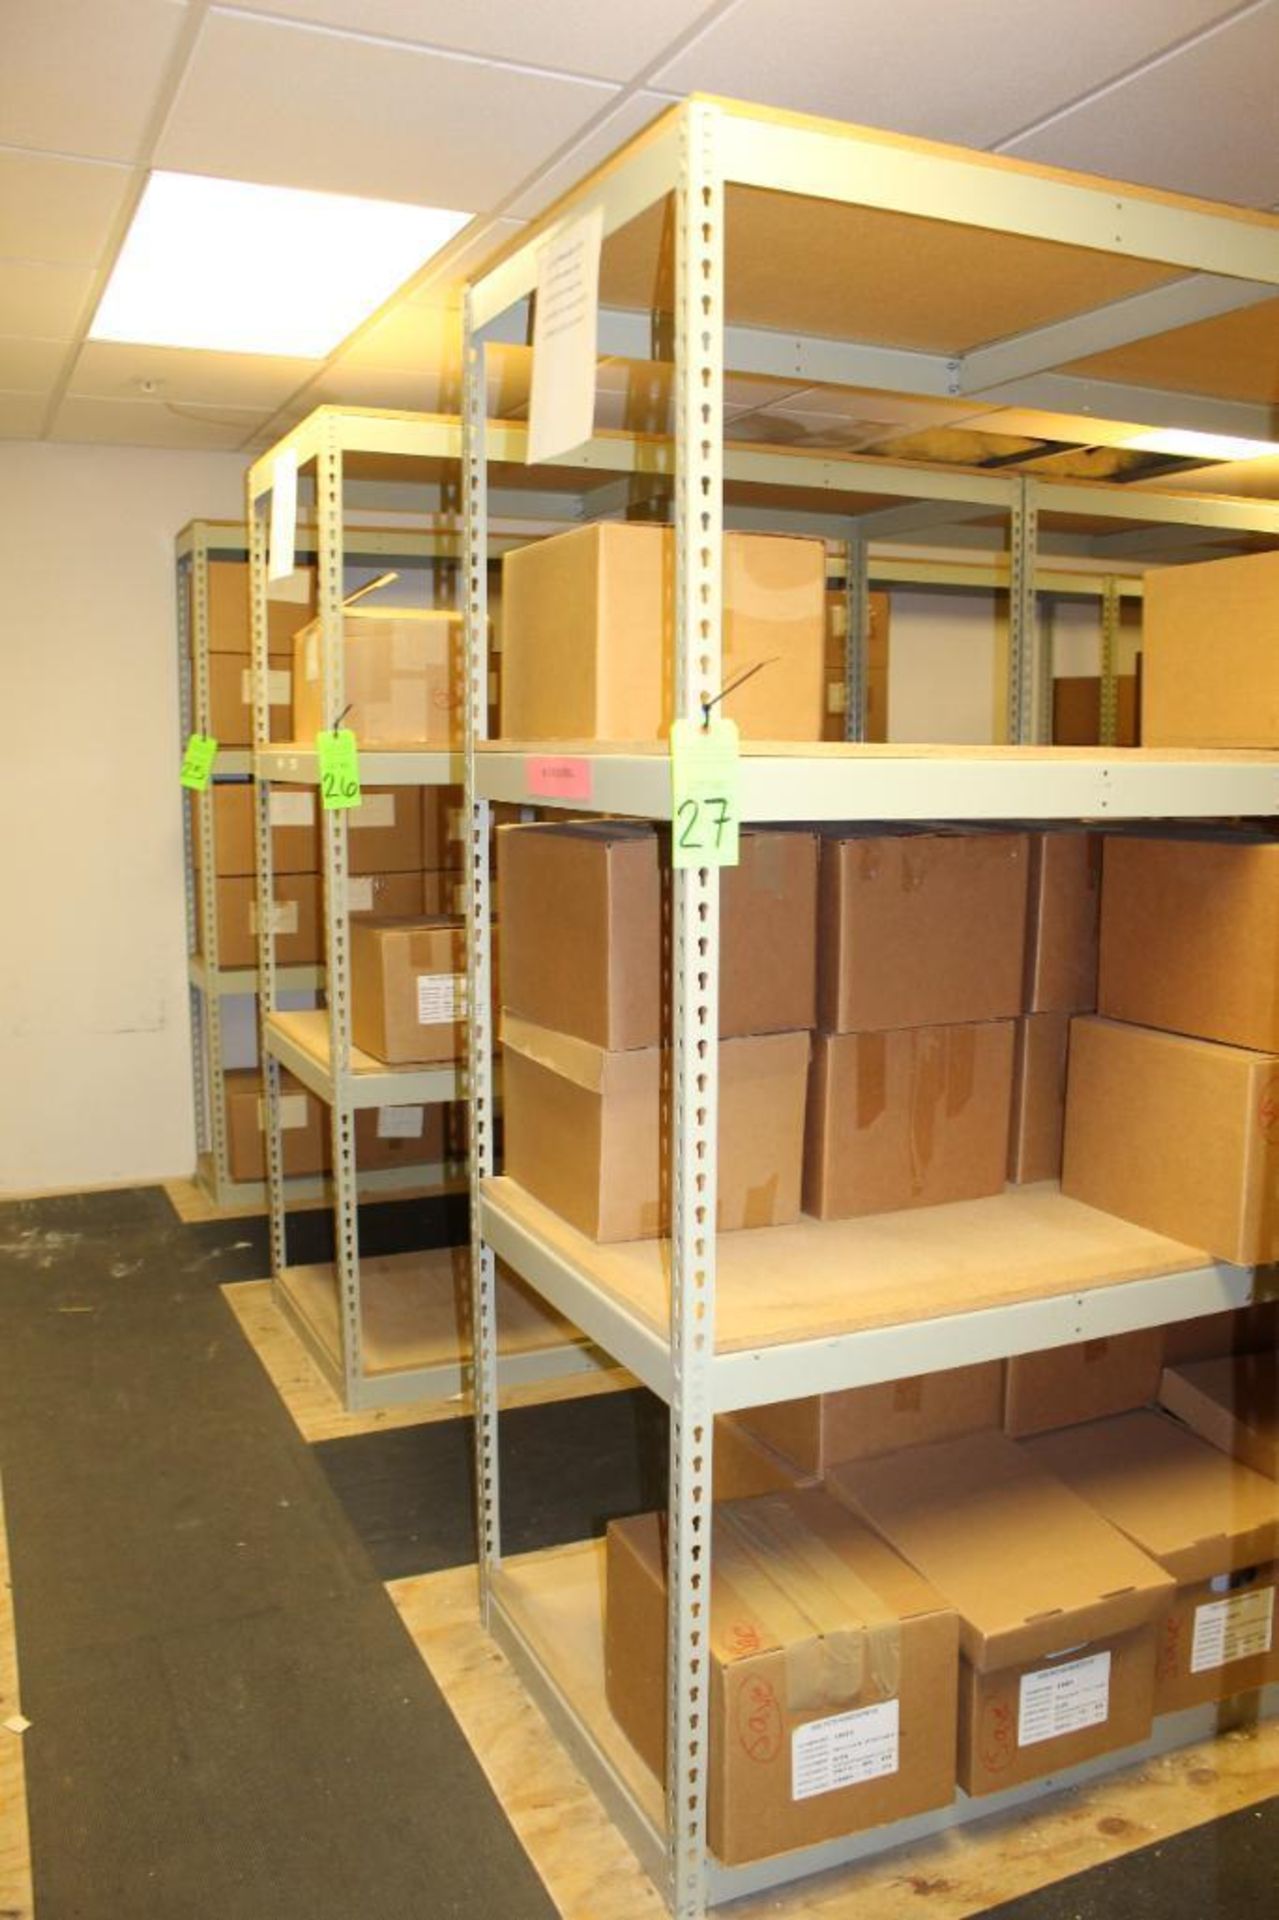 3 Sections of Shelving - no contents